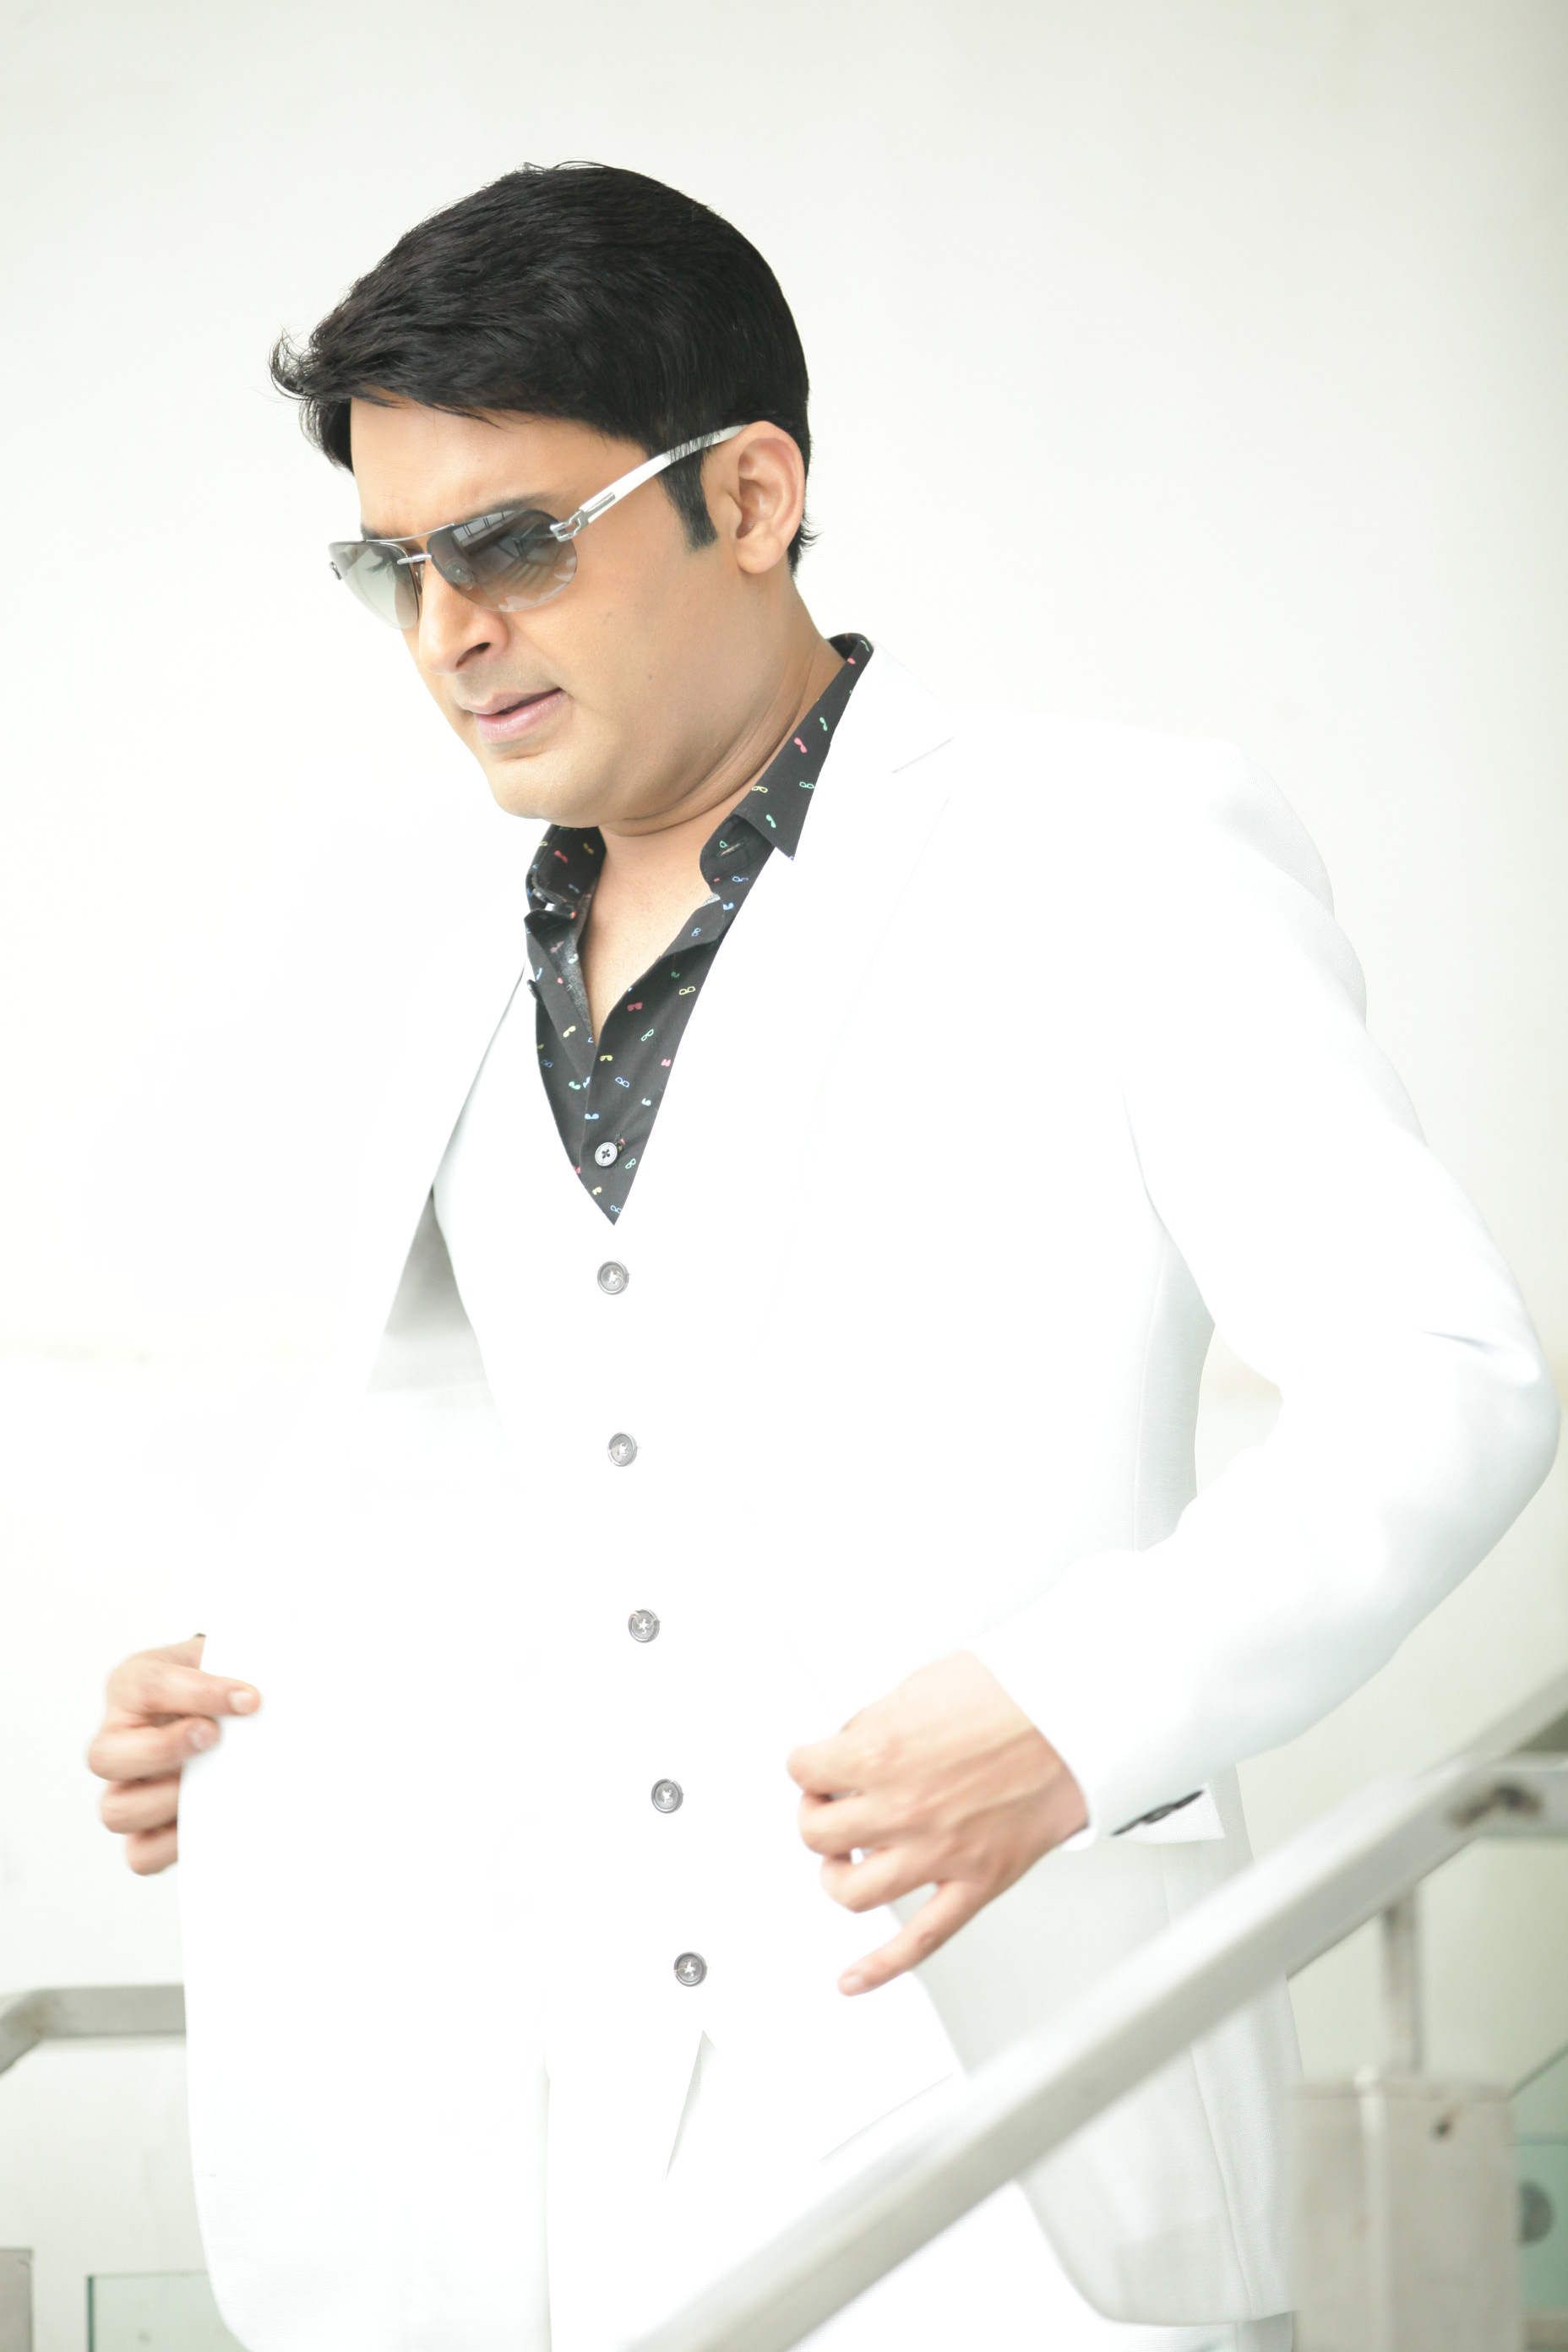 Kapil Sharma Pictures Image & HD Full Wallpapers Downloads